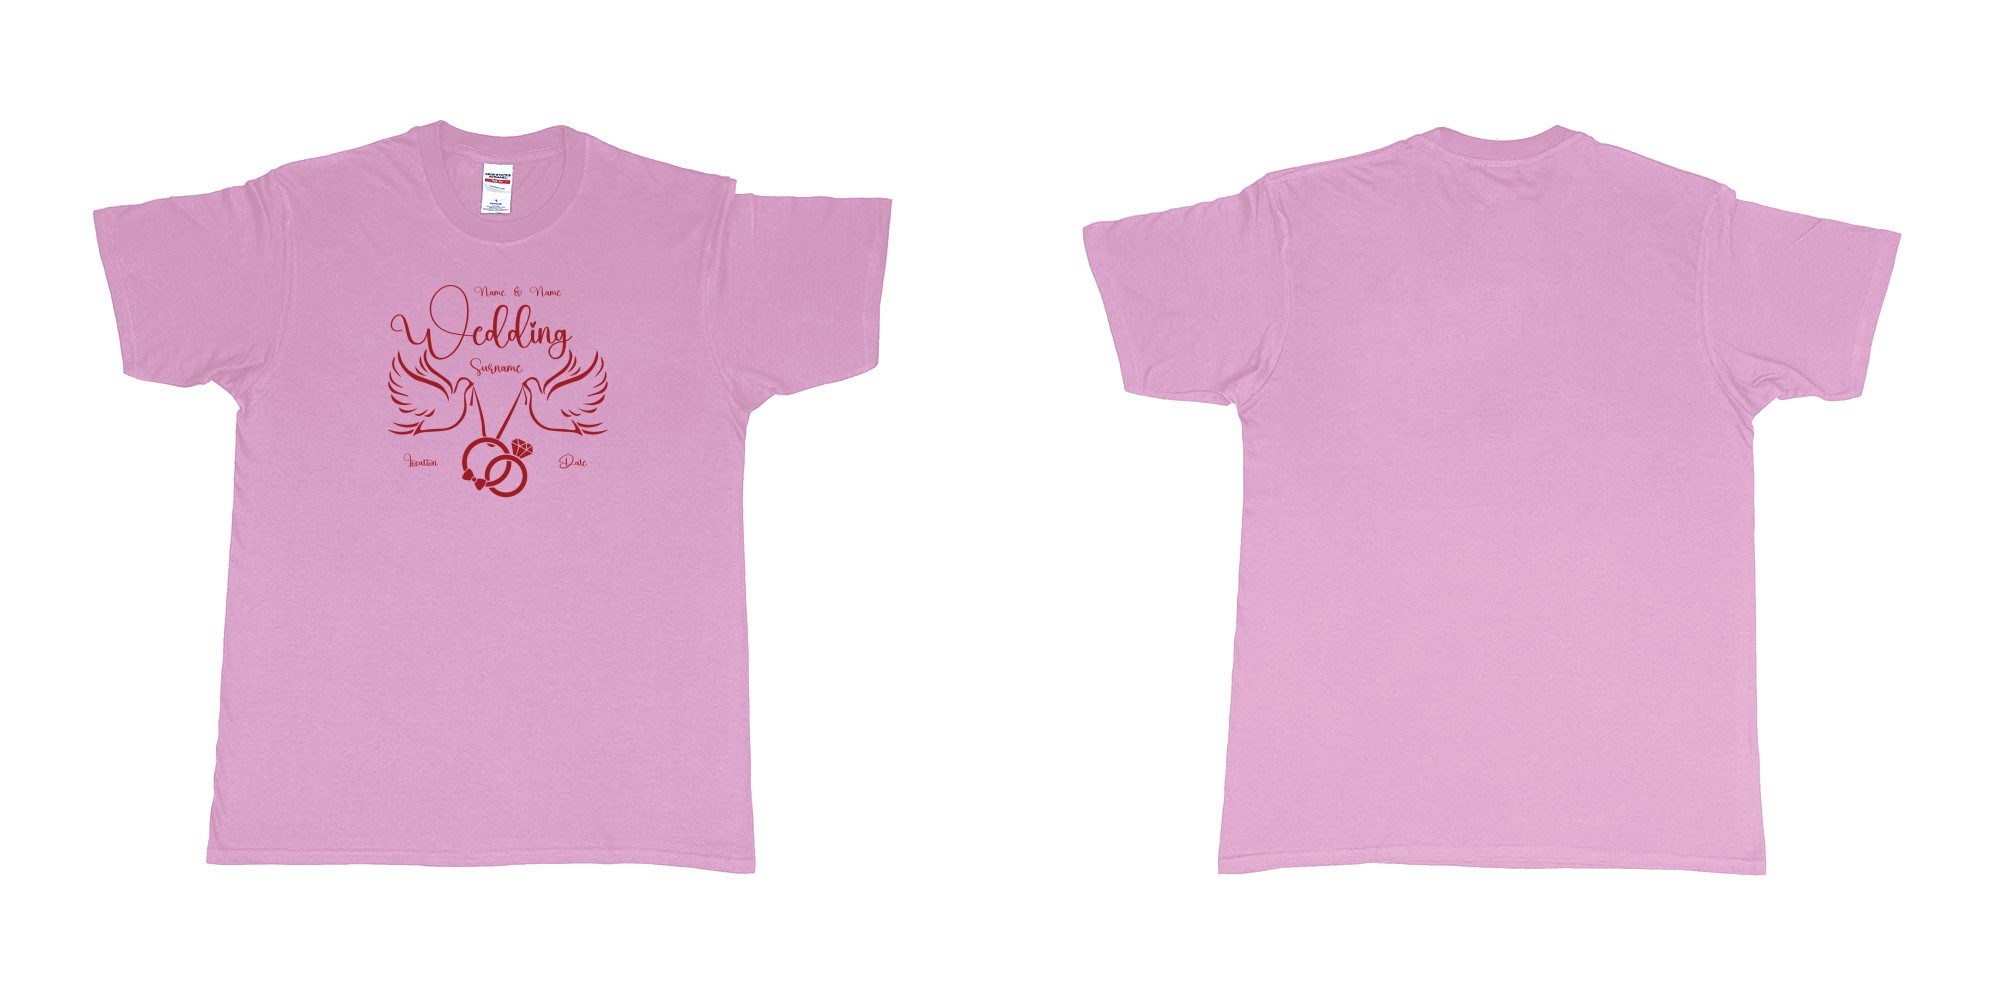 Custom tshirt design wedding doves holding rings in fabric color light-pink choice your own text made in Bali by The Pirate Way